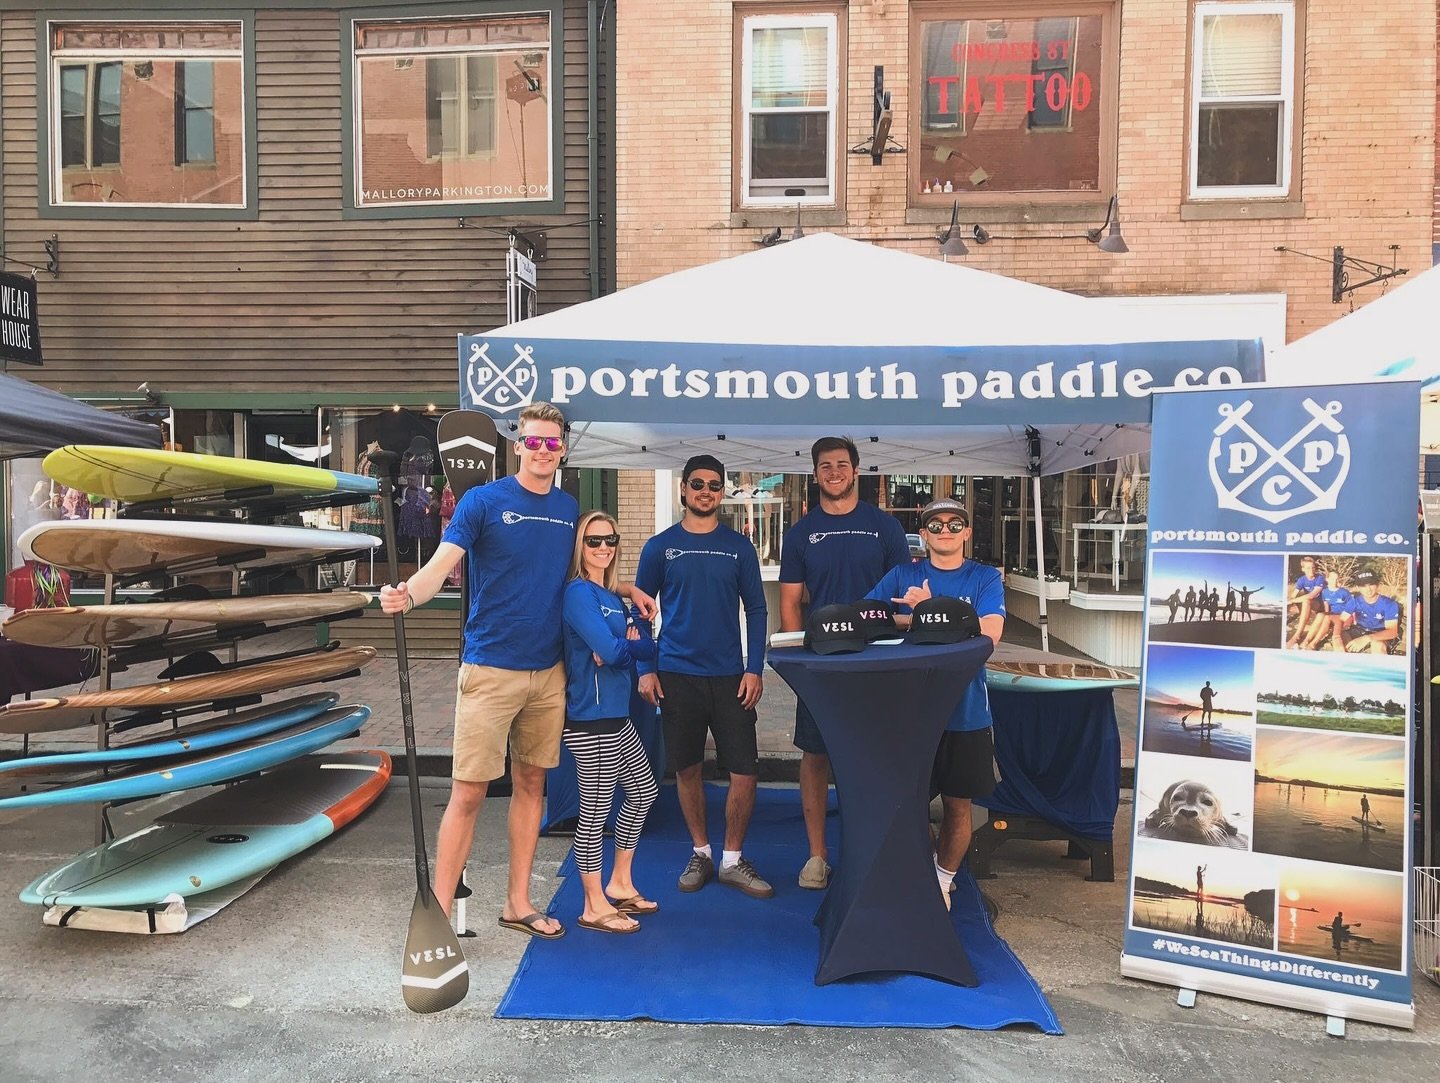 #TBT to our 2018 Crew ⚓️ 

Started at PPC&hellip; and now off building empires and doing amazing things in the world ✌️

If you have a fond memory of buying a board or laughing on the water with this crew, we want to hear it!

Celebrating our 10th se